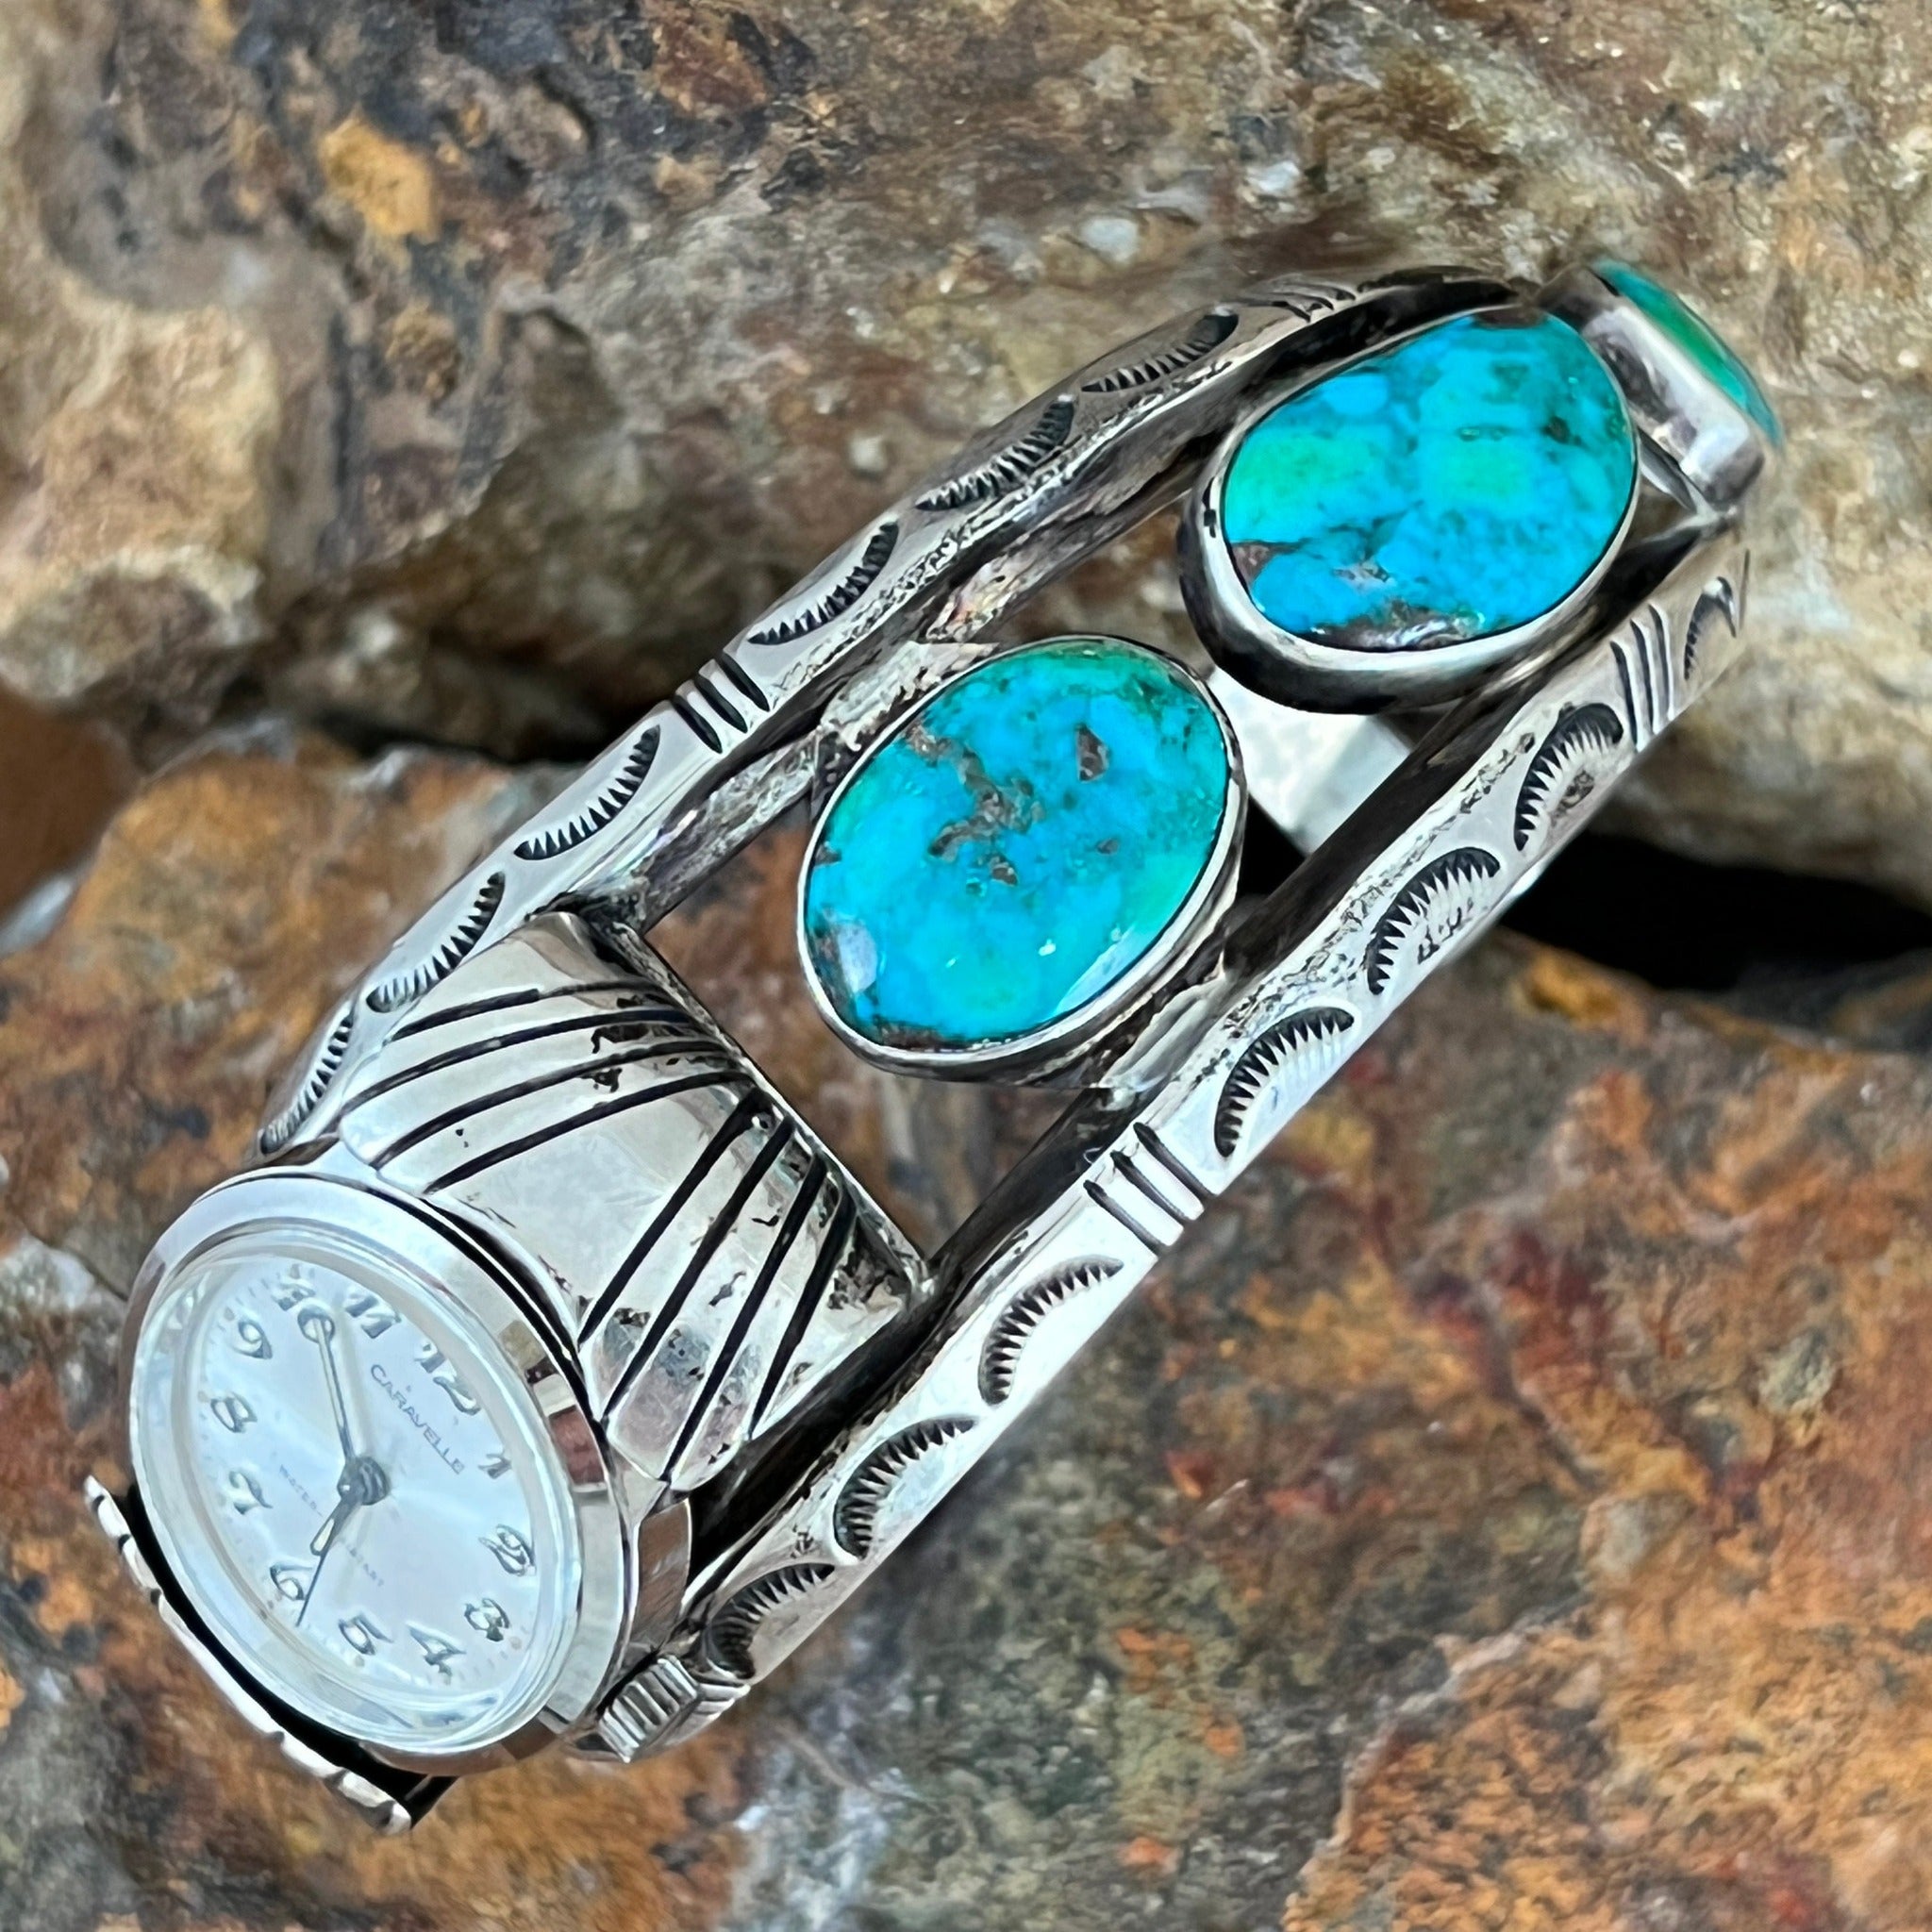 Ladies Southwest Turquoise Coral Silver Watch Cuff Sterling Bracelet 35385